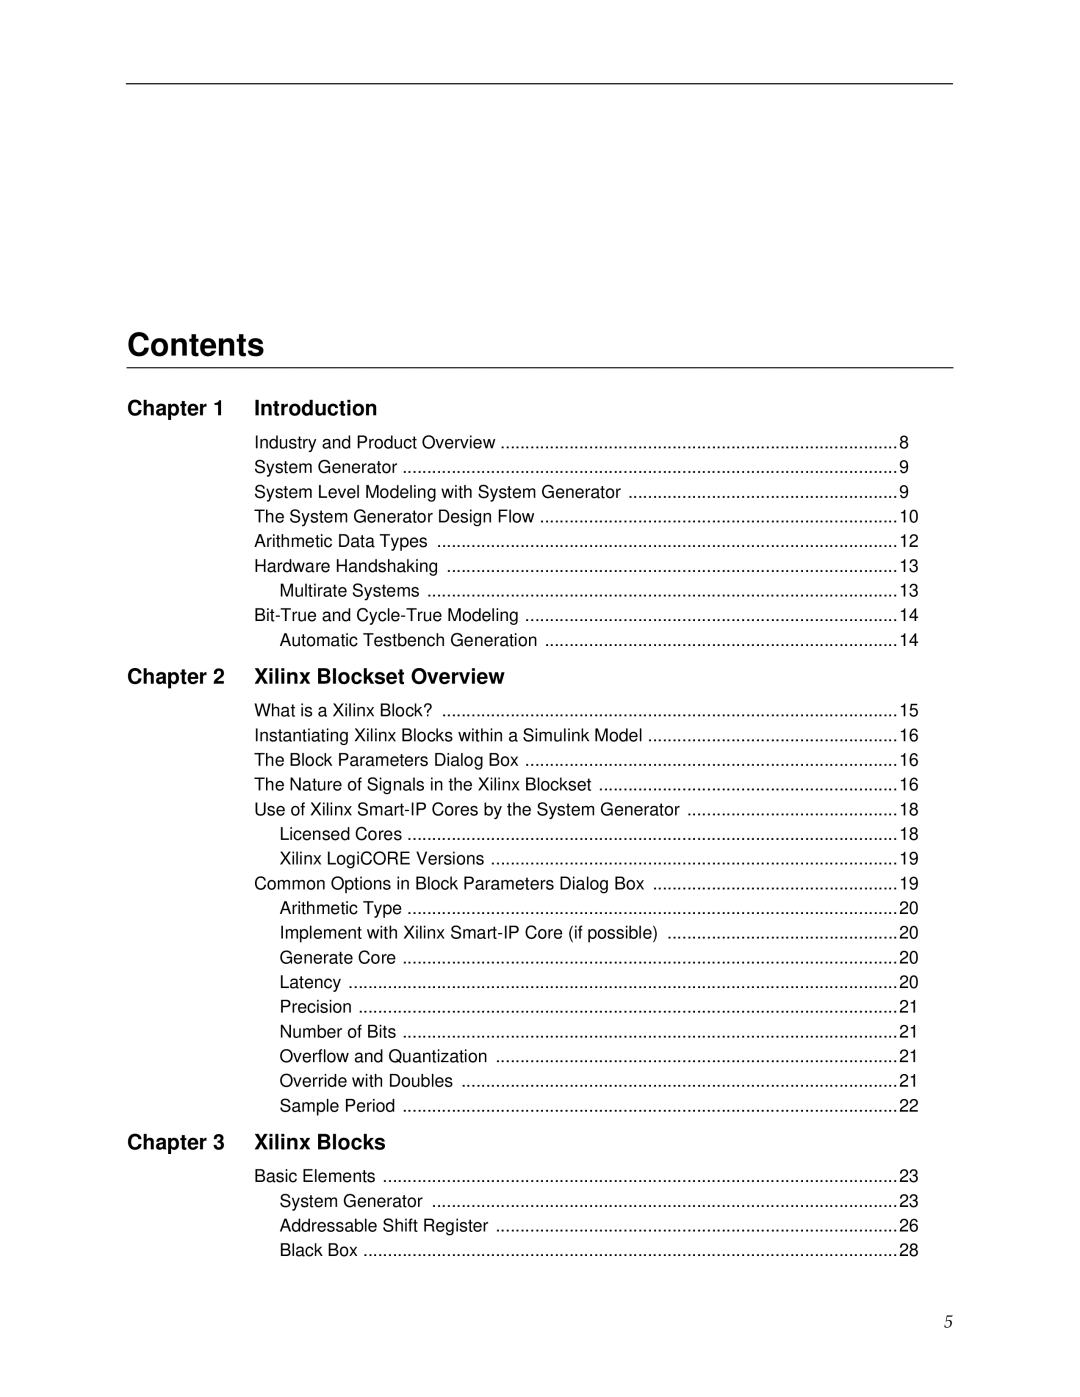 Xilinx V2.1 manual Contents, Chapter, Introduction, Xilinx Blockset Overview 